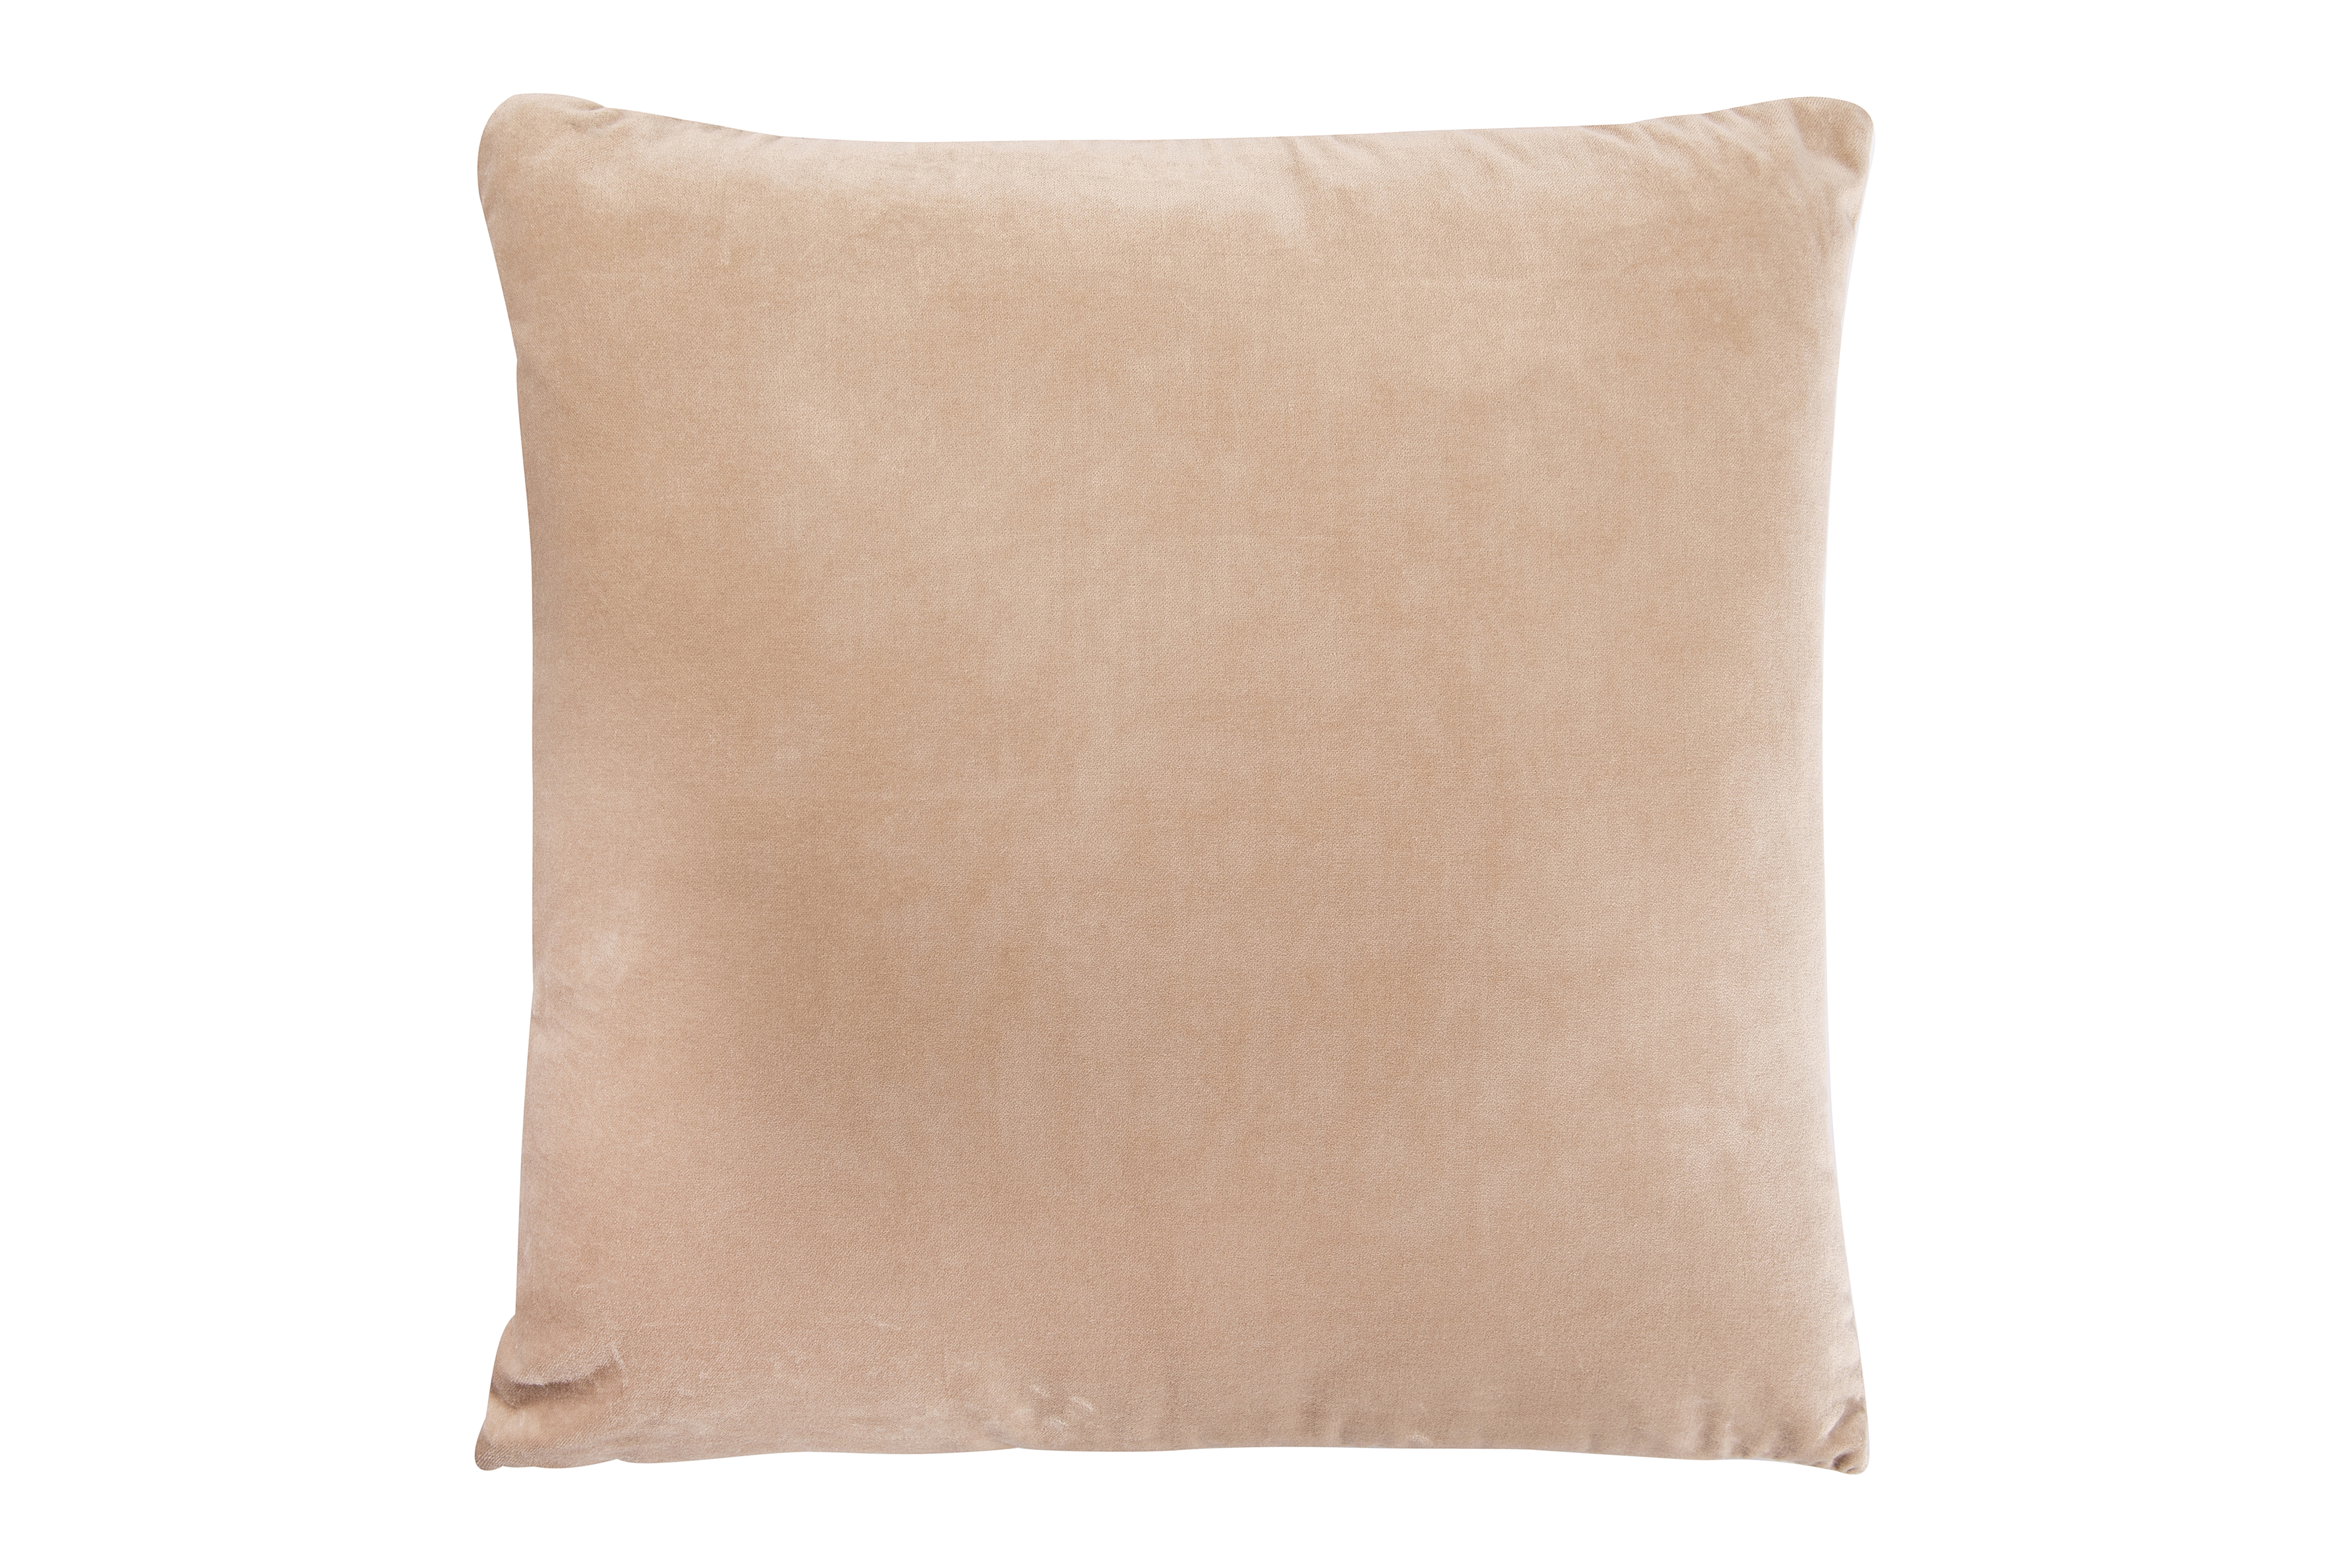 Square Taupe Cotton Velvet Pillow with Cream Back - Nomad Home